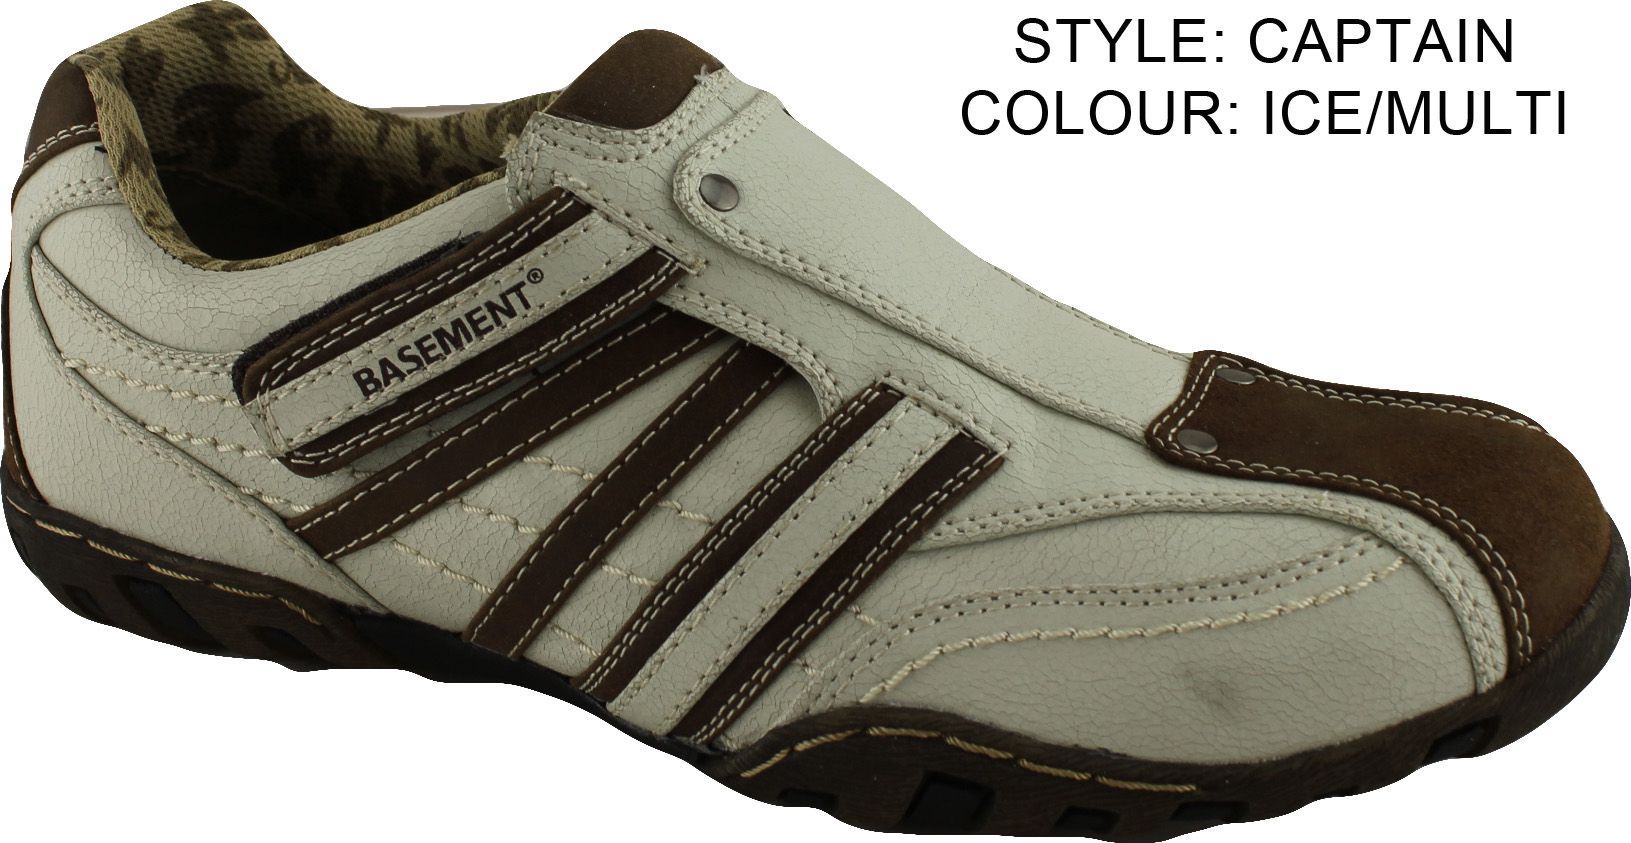 Basement Mens Assorted CLEARANCE Shoes Casuals Sneakers on eBay Australia | eBay